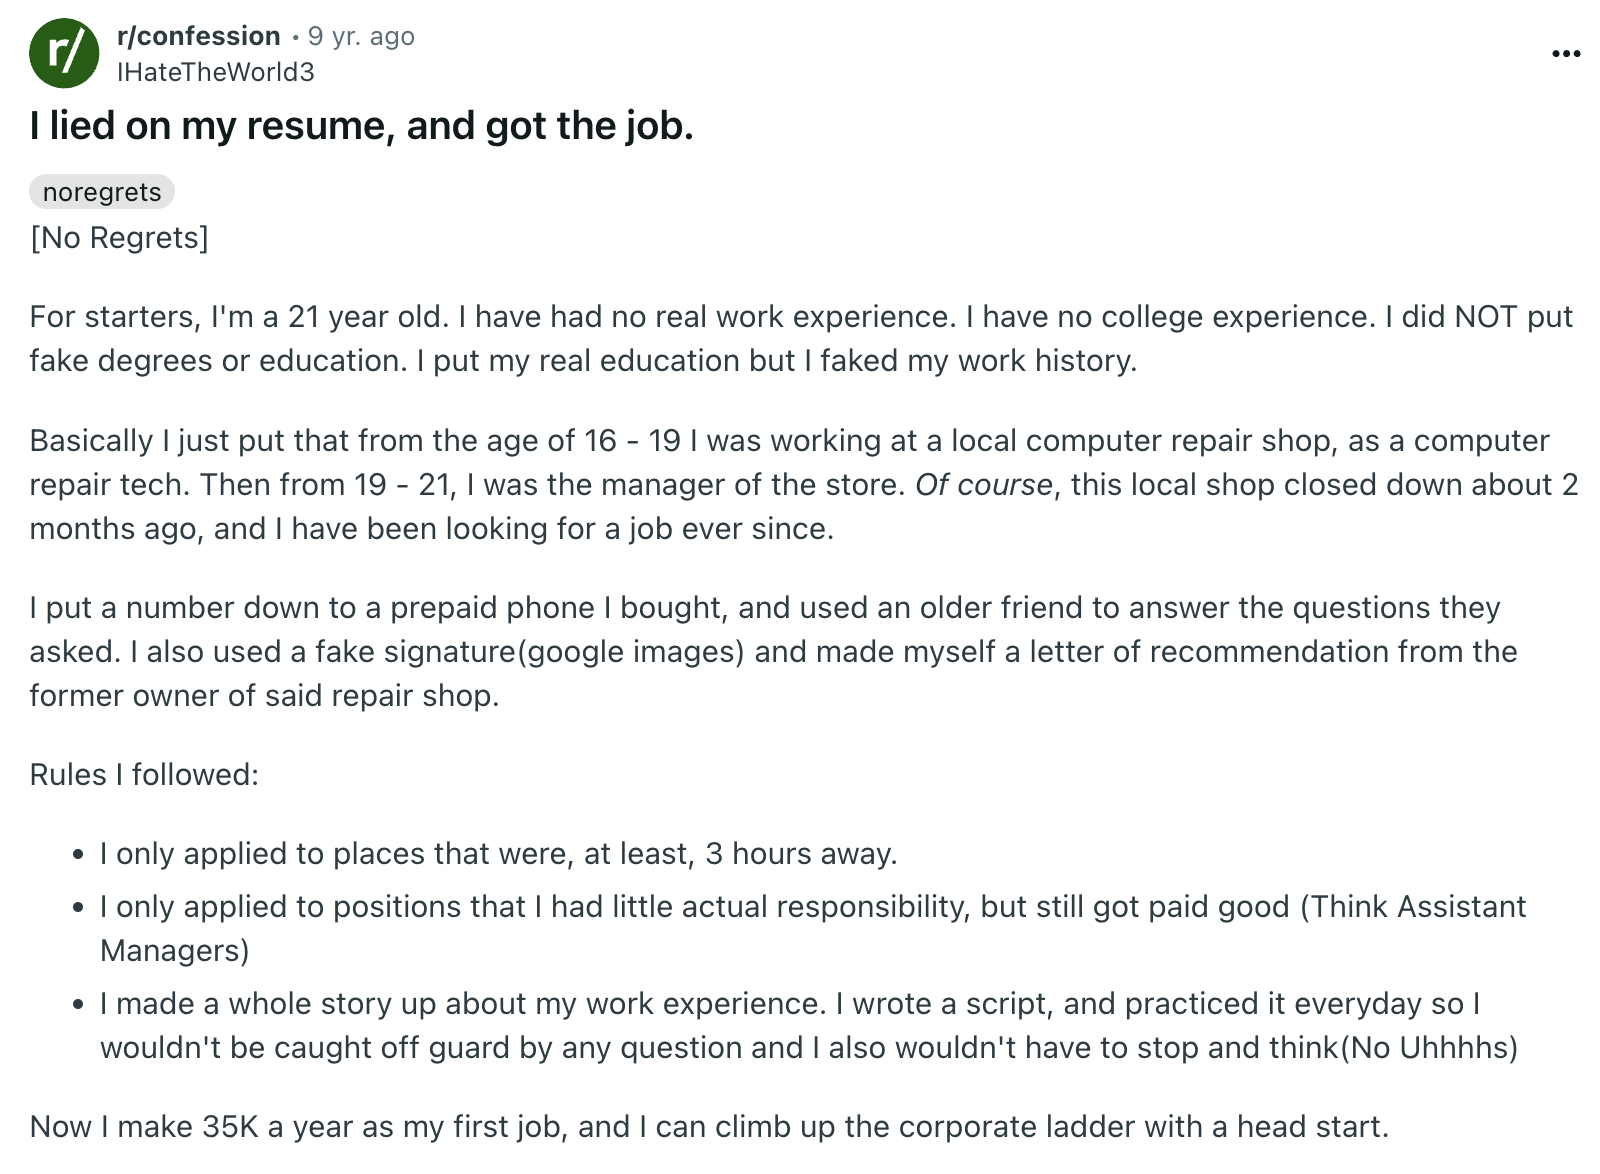 document - r rconfession 9 yr. ago IHateTheWorld3 I lied on my resume, and got the job. noregrets No Regrets For starters, I'm a 21 year old. I have had no real work experience. I have no college experience. I did Not put fake degrees or education. I put 